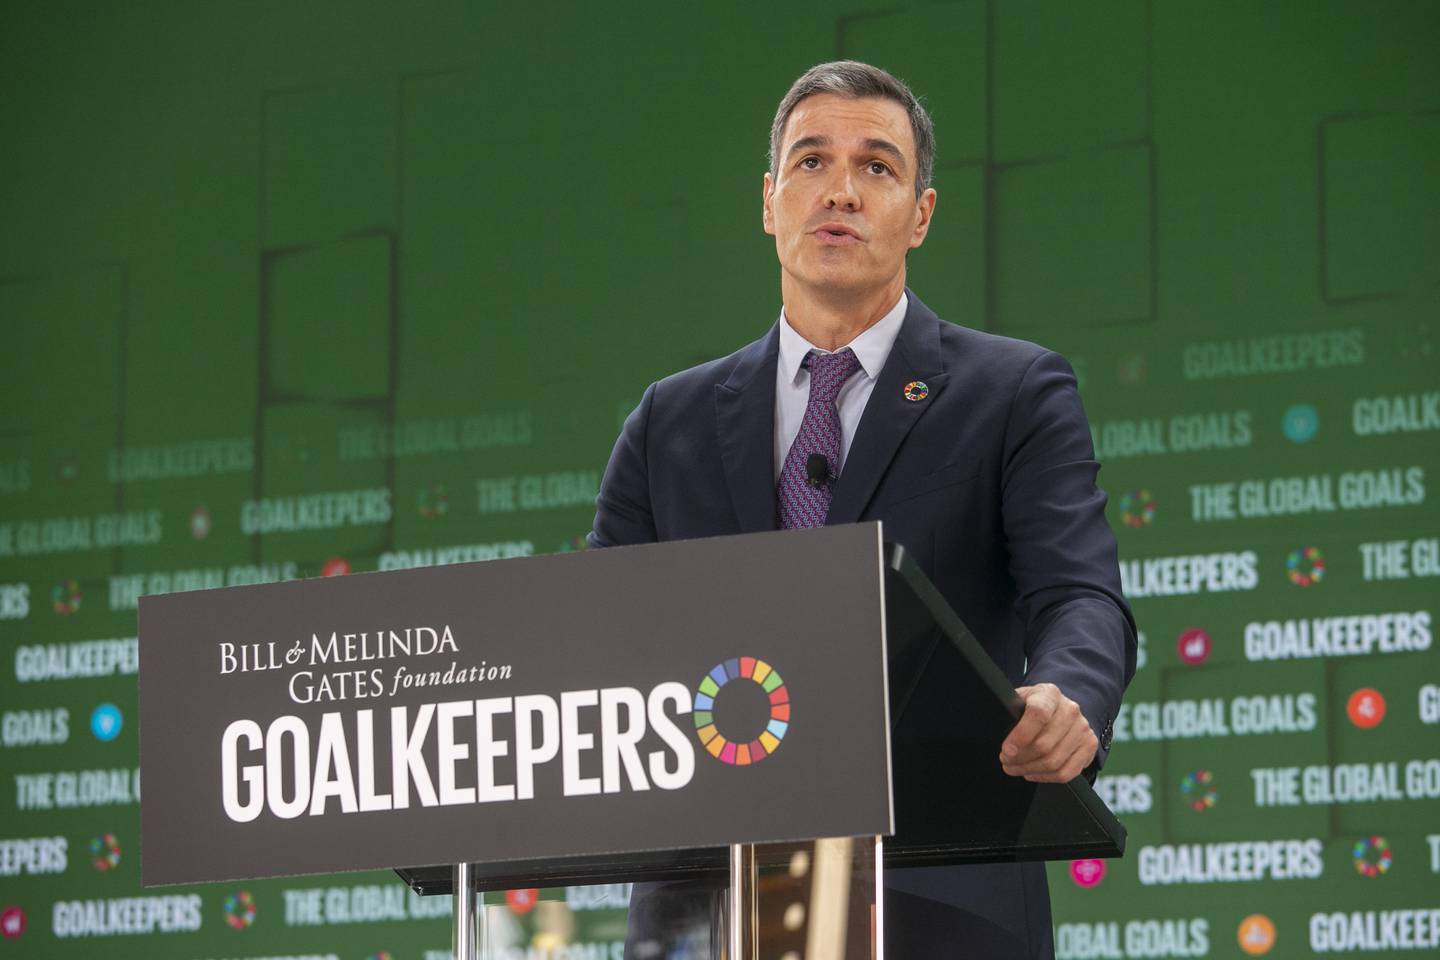 Spanish Prime Minister Pedro Sanchez speaks at the Goalkeepers event hosted by the Bill and Melinda Gates Foundation in New York. EPA